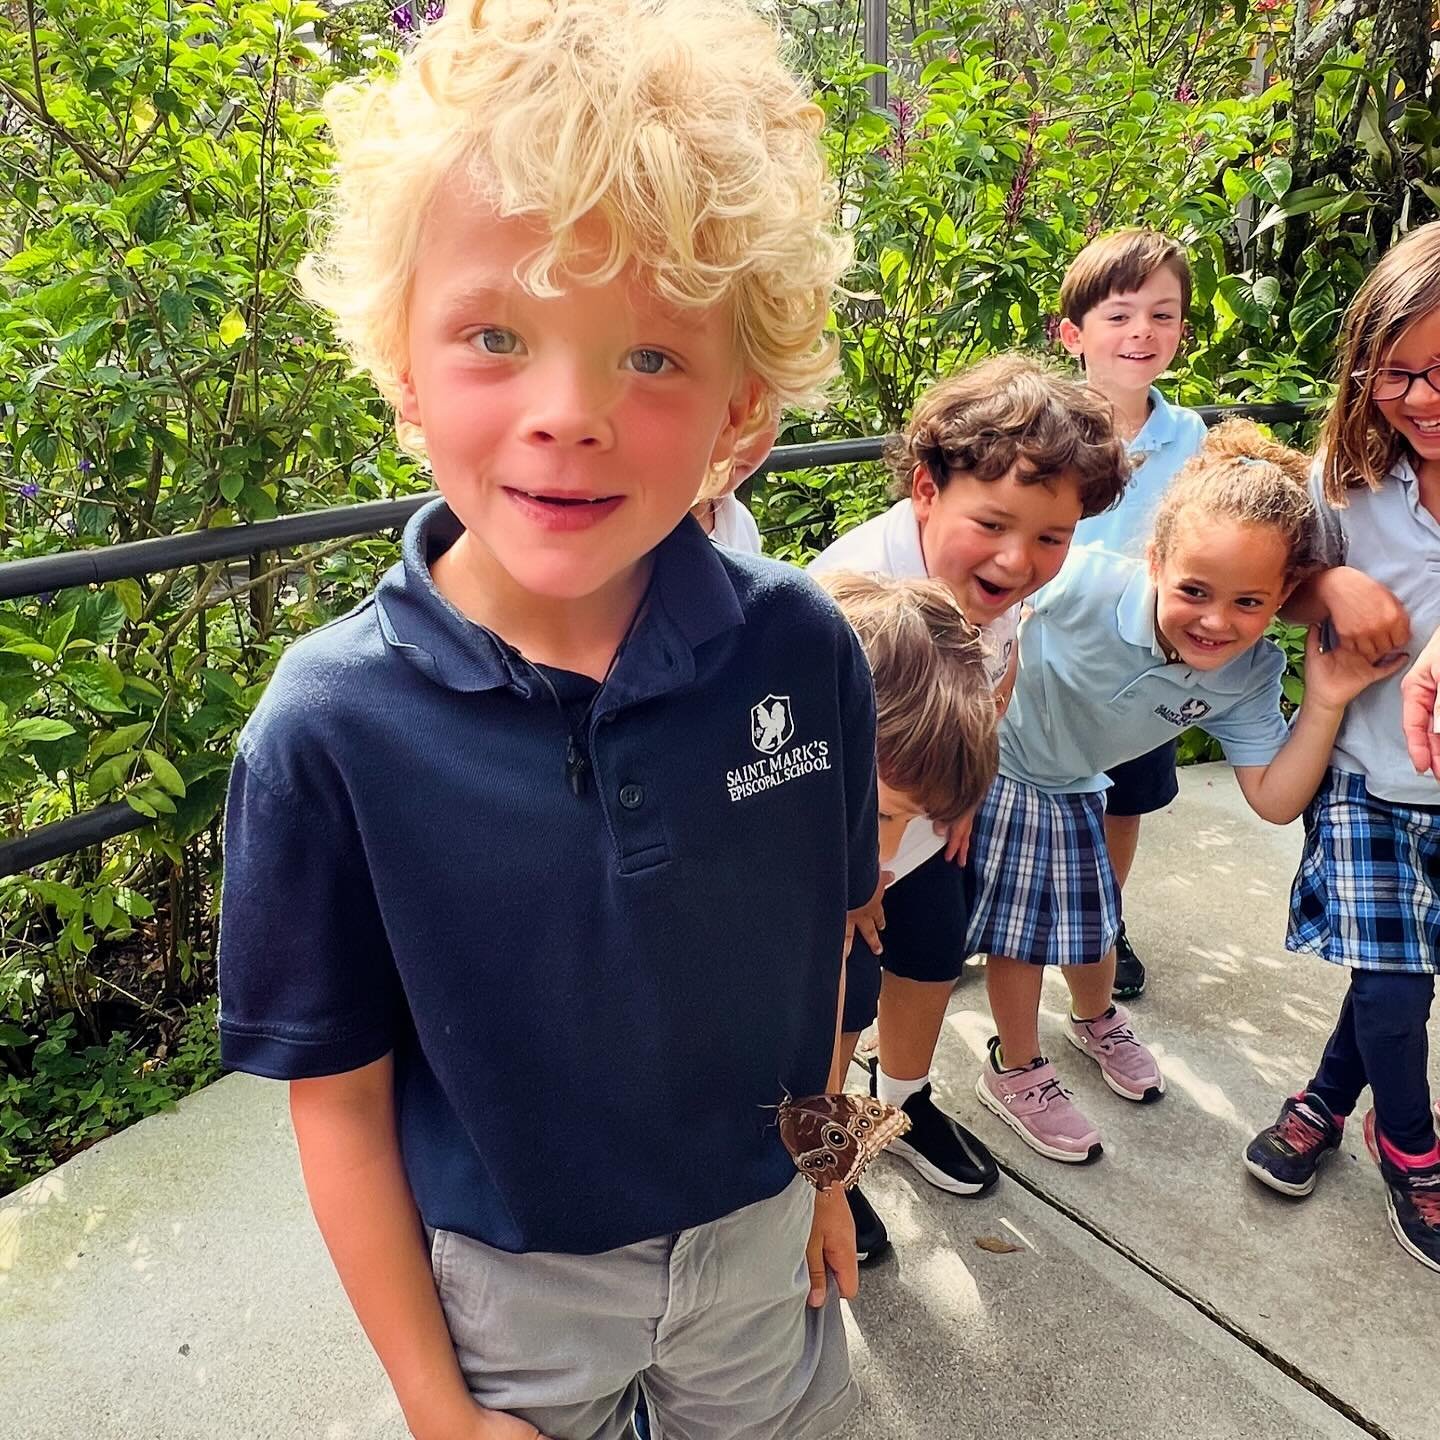 🦋🌿✨ Today was a fluttery-fun adventure at Butterfly World with our little explorers from Kindergarten! 

🎉 From vibrant wings to delicate dances, they were mesmerized by nature's artistry. Thanks to our teachers and tiny adventurers for spreading 